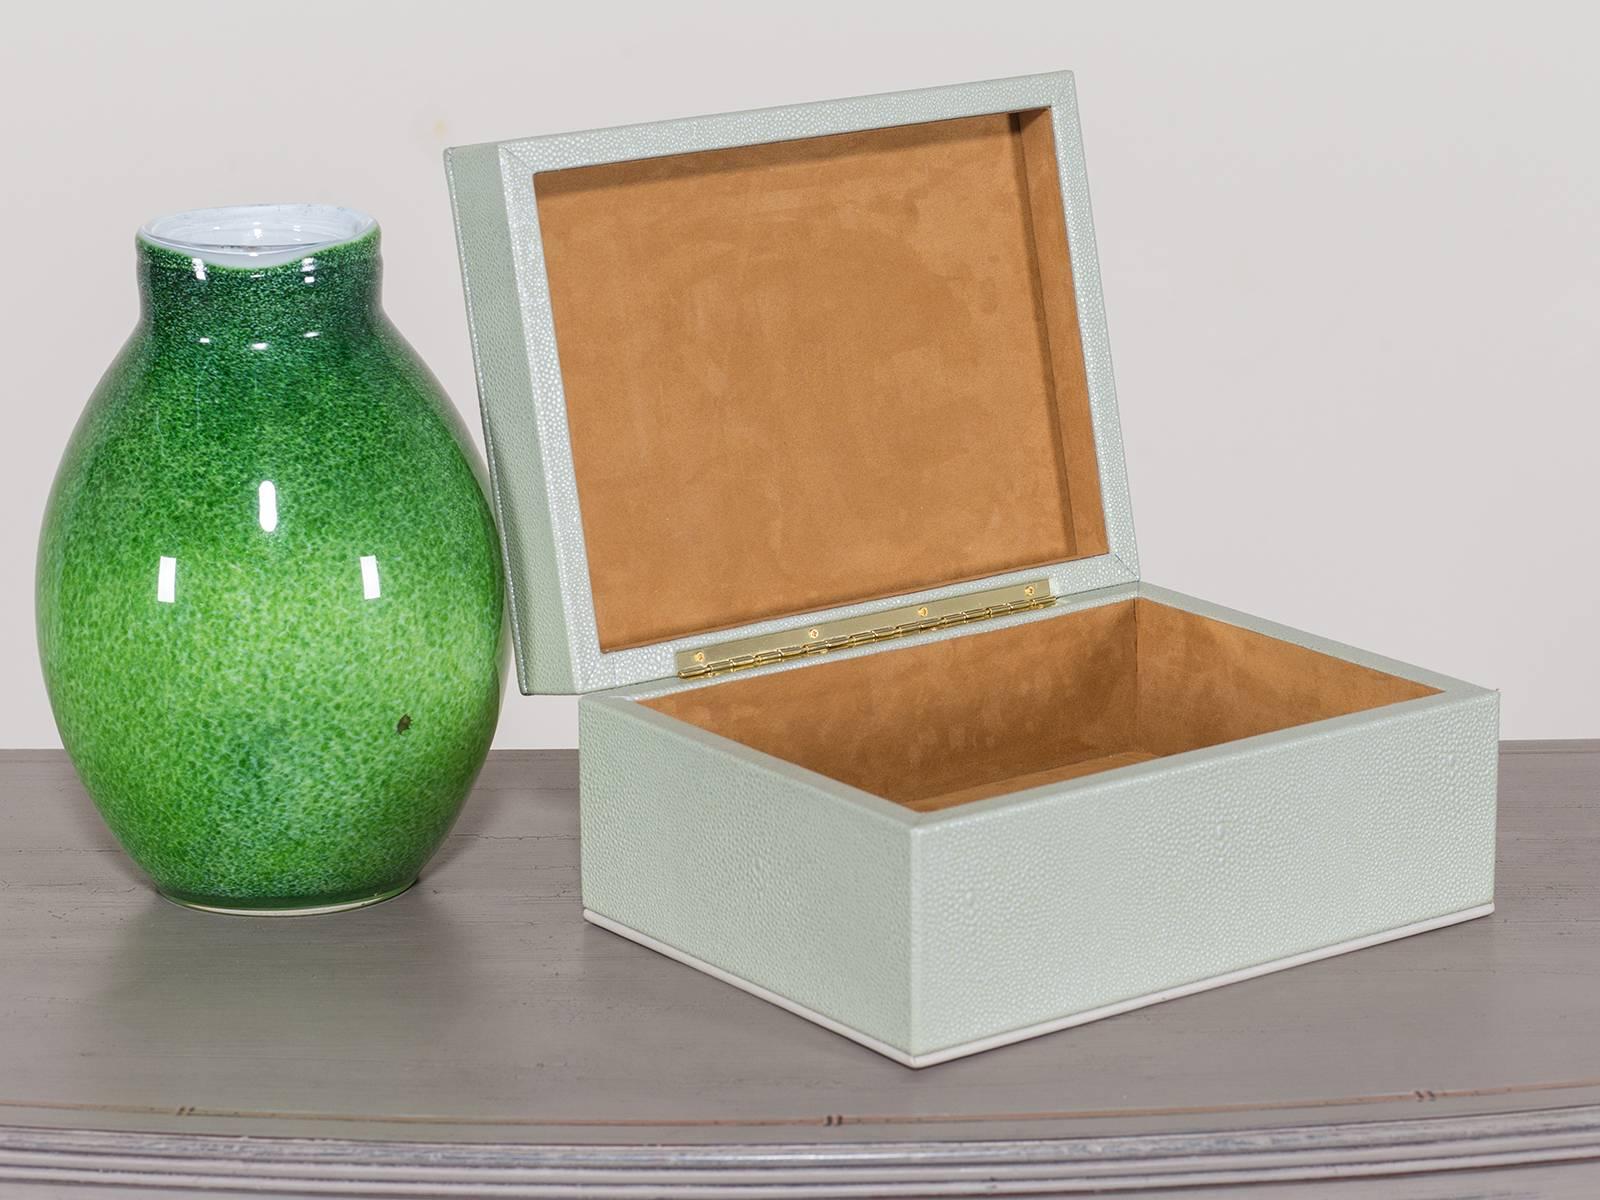 The marvelous texture of shagreen is shown here to great effect as the top and all sides of the box are sheathed in this rare and luxurious material. A favorite of Art Deco designers the unique texture of shagreen results from its origin as the skin